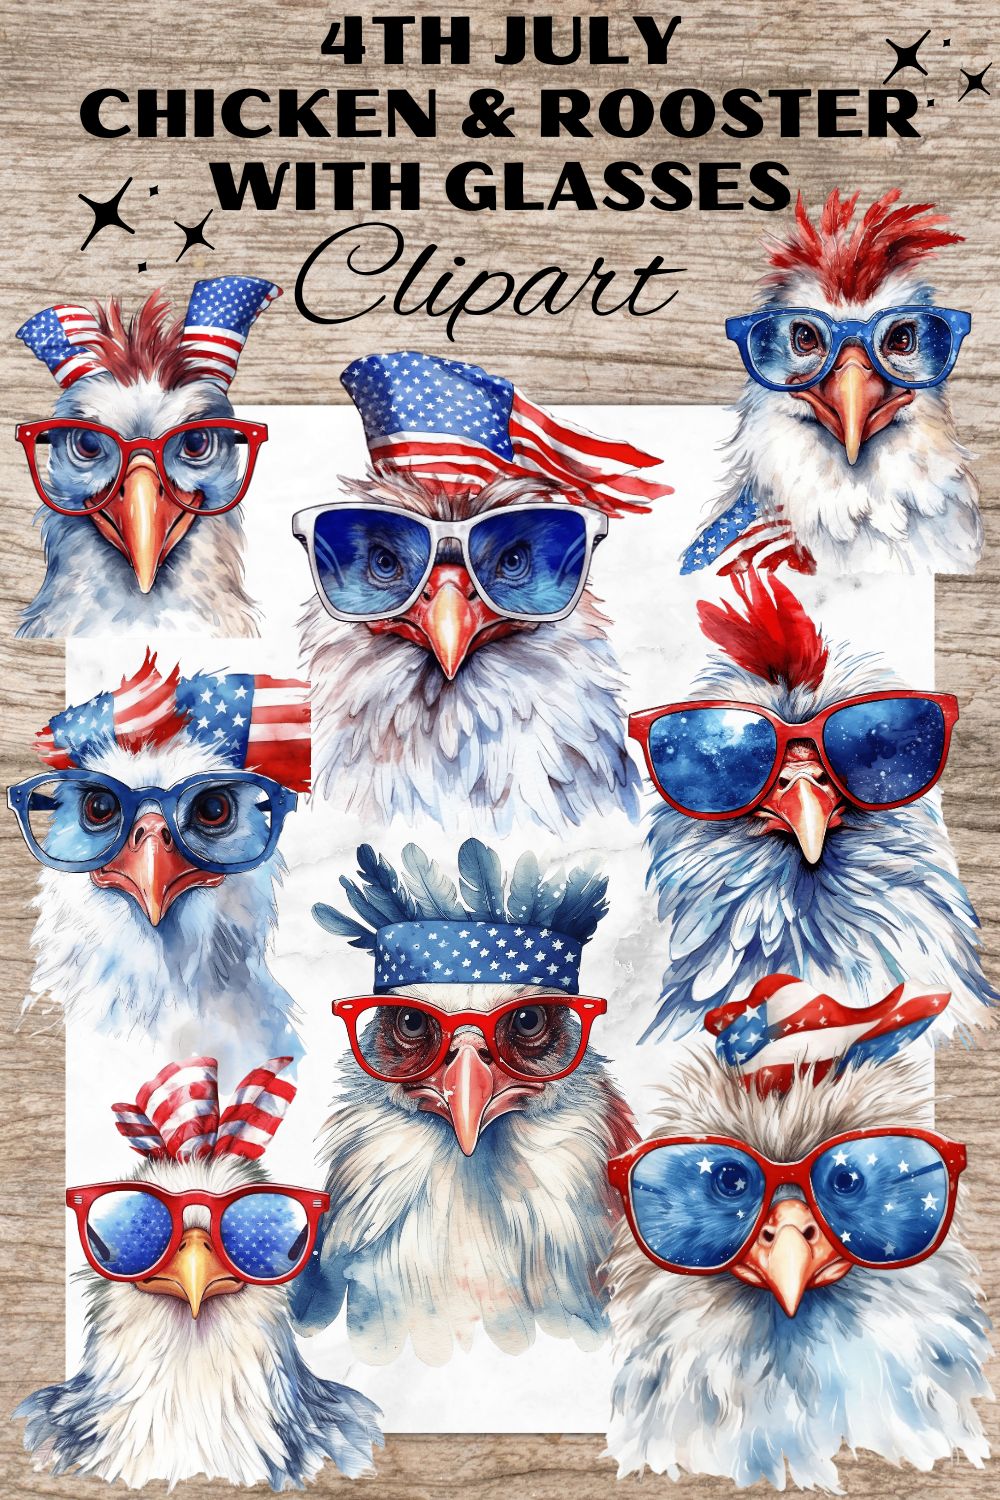 12 American 4th of July Chicken PNG, Watercolor Clipart, Chicken & Rooster with glasses, Transparent PNG, Digital Paper Craft, Illustrations, Watercolor Clipart for Scrapbook, Invitation, Wall Art, T-Shirt Design pinterest preview image.